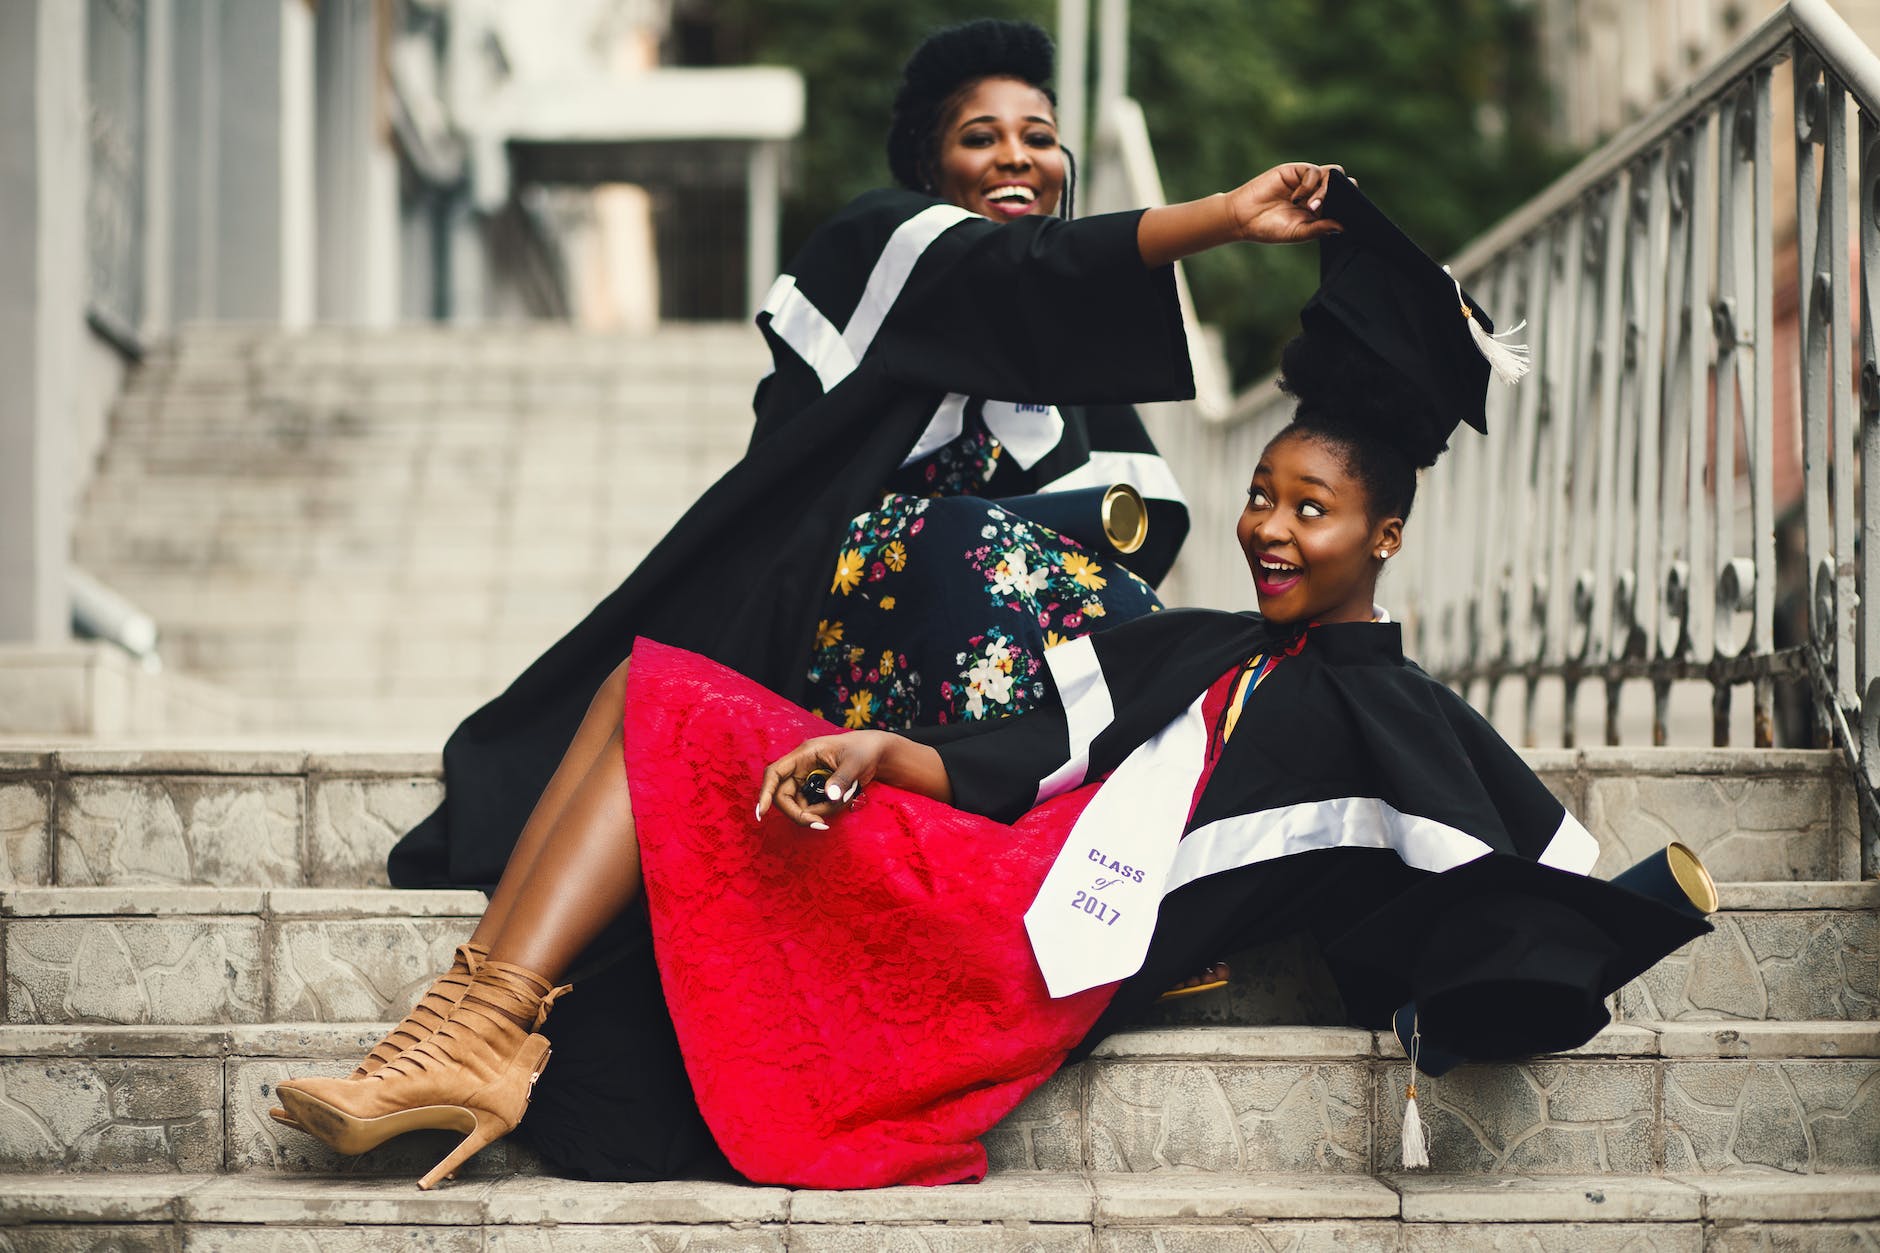 shallow focus photography of two women in academic dress on flight of stairs